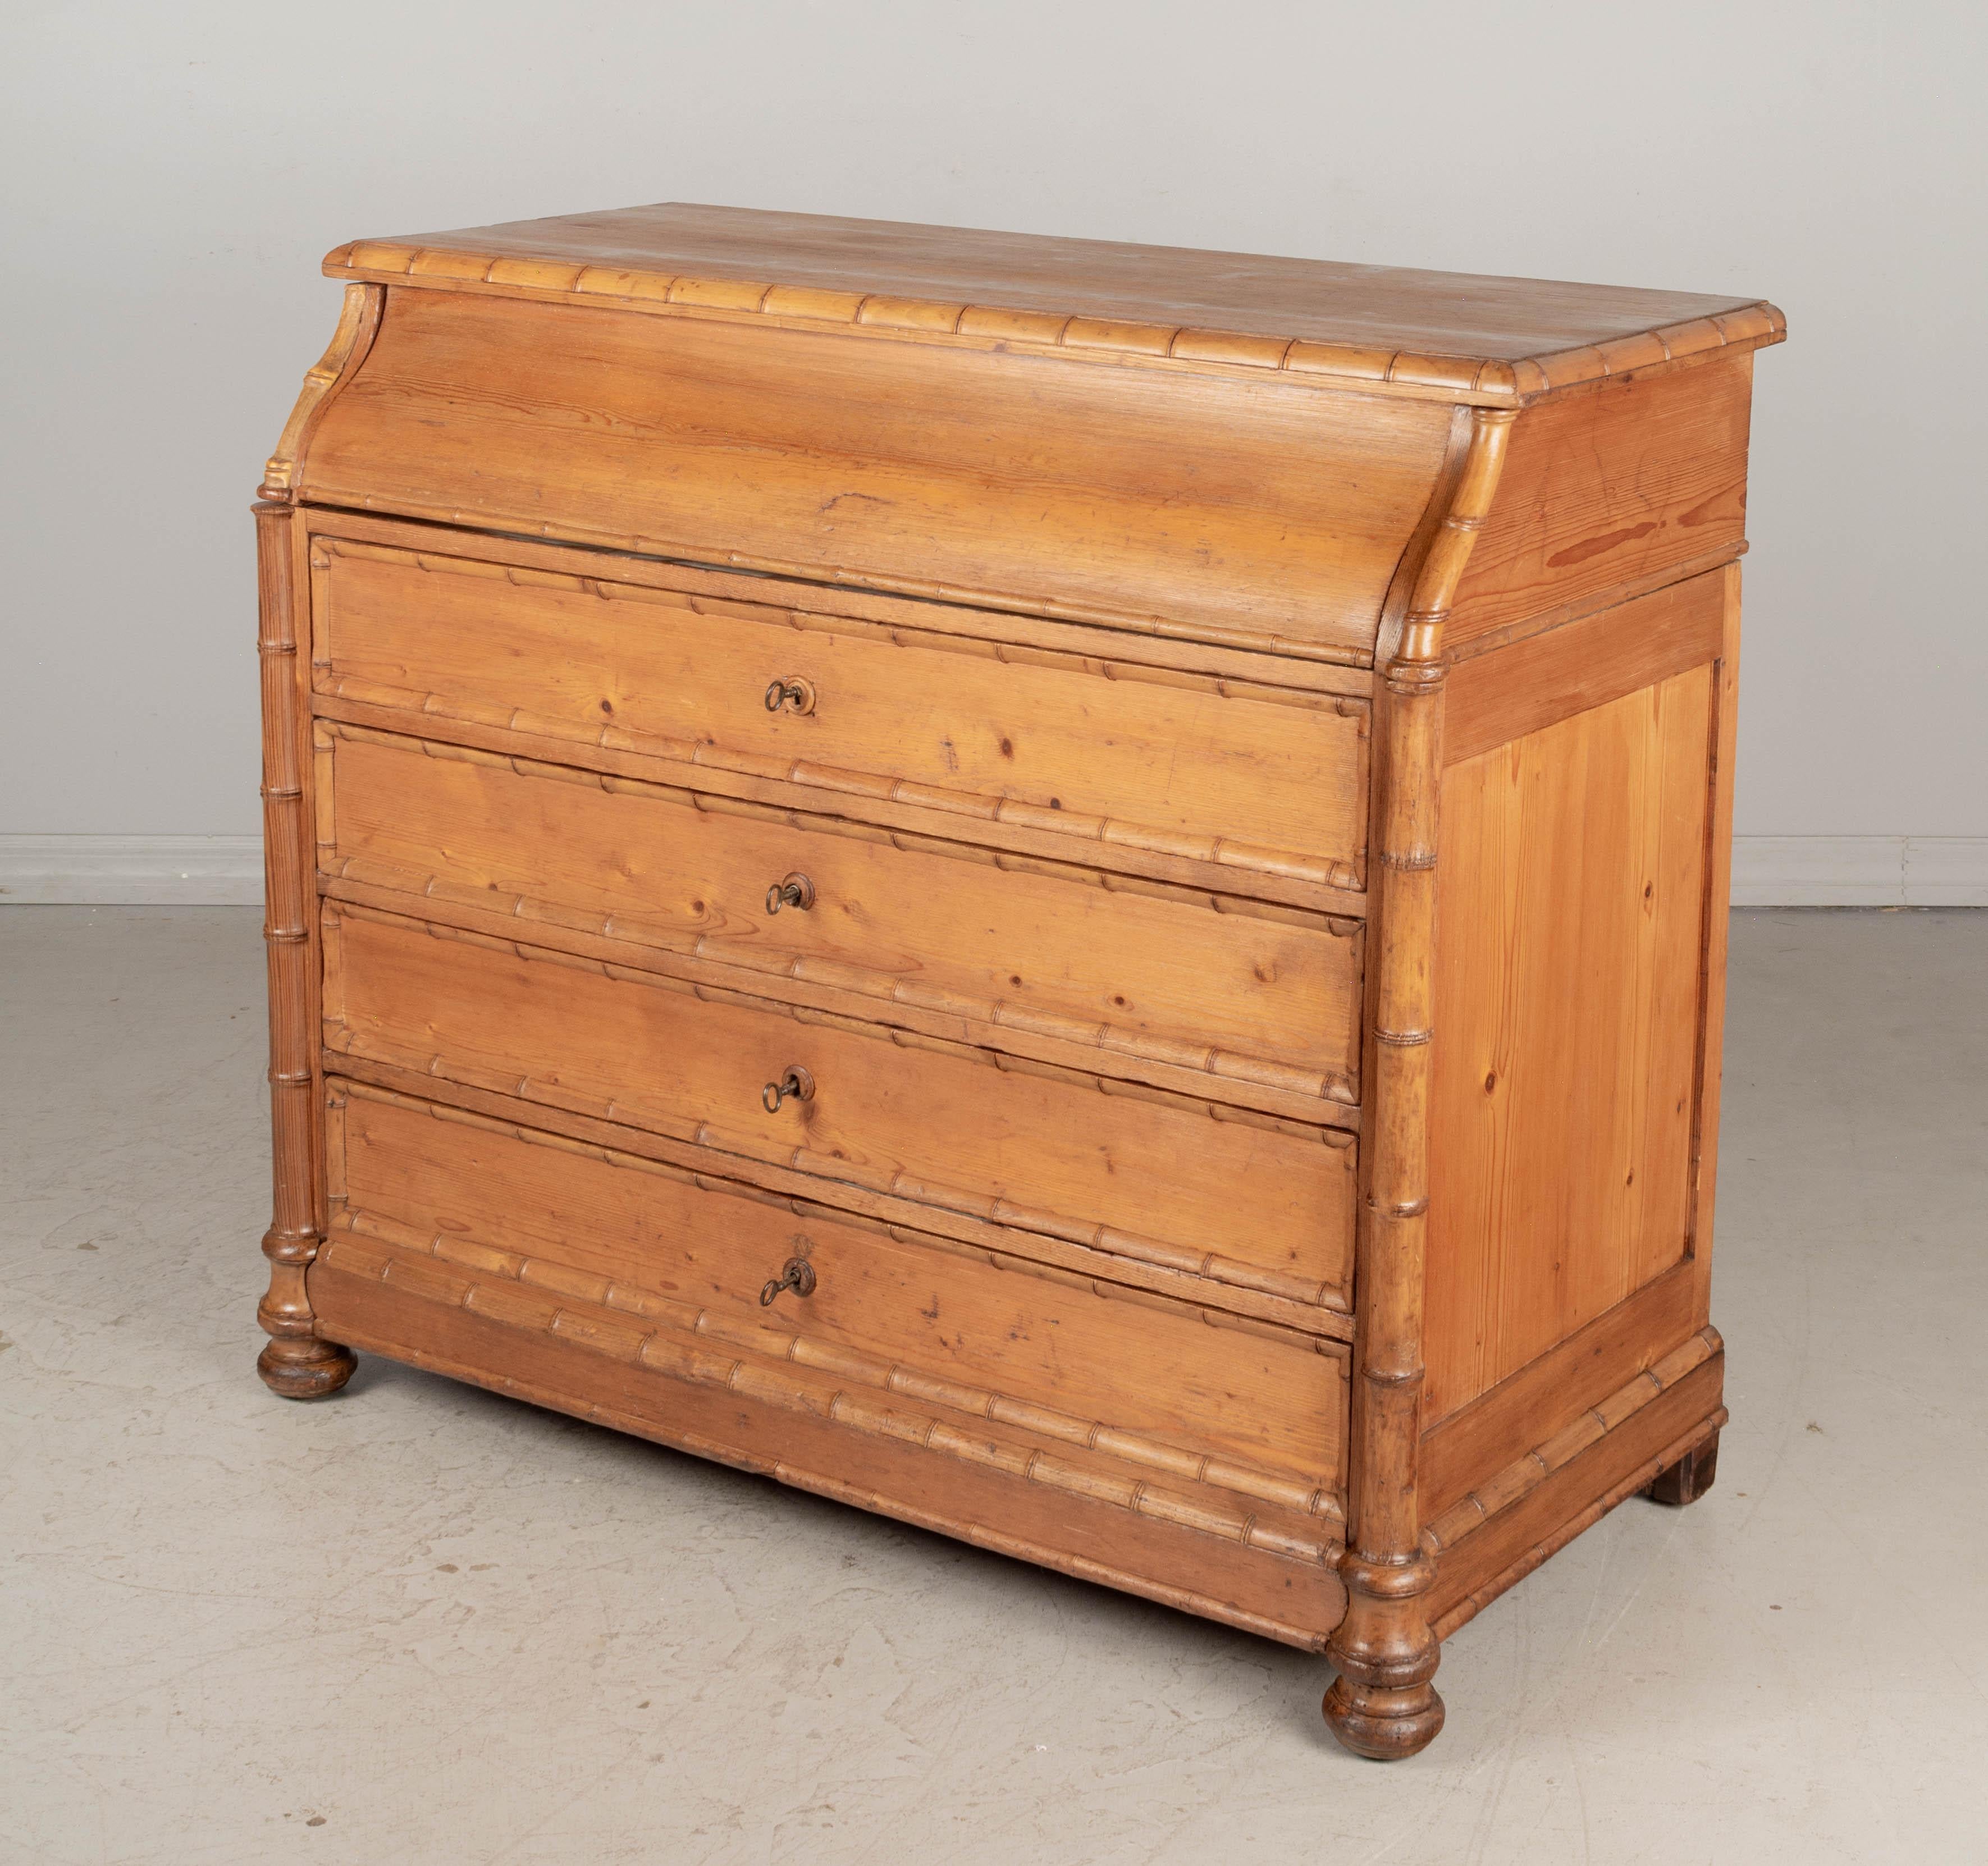 An early 20th century French faux bamboo commode de toilette, or dresser with a pull-out marble top vanity and mirror. Made of pine with cherry wood faux bamboo trim. Four dovetailed drawers, each with working lock and key. The top hinges open and